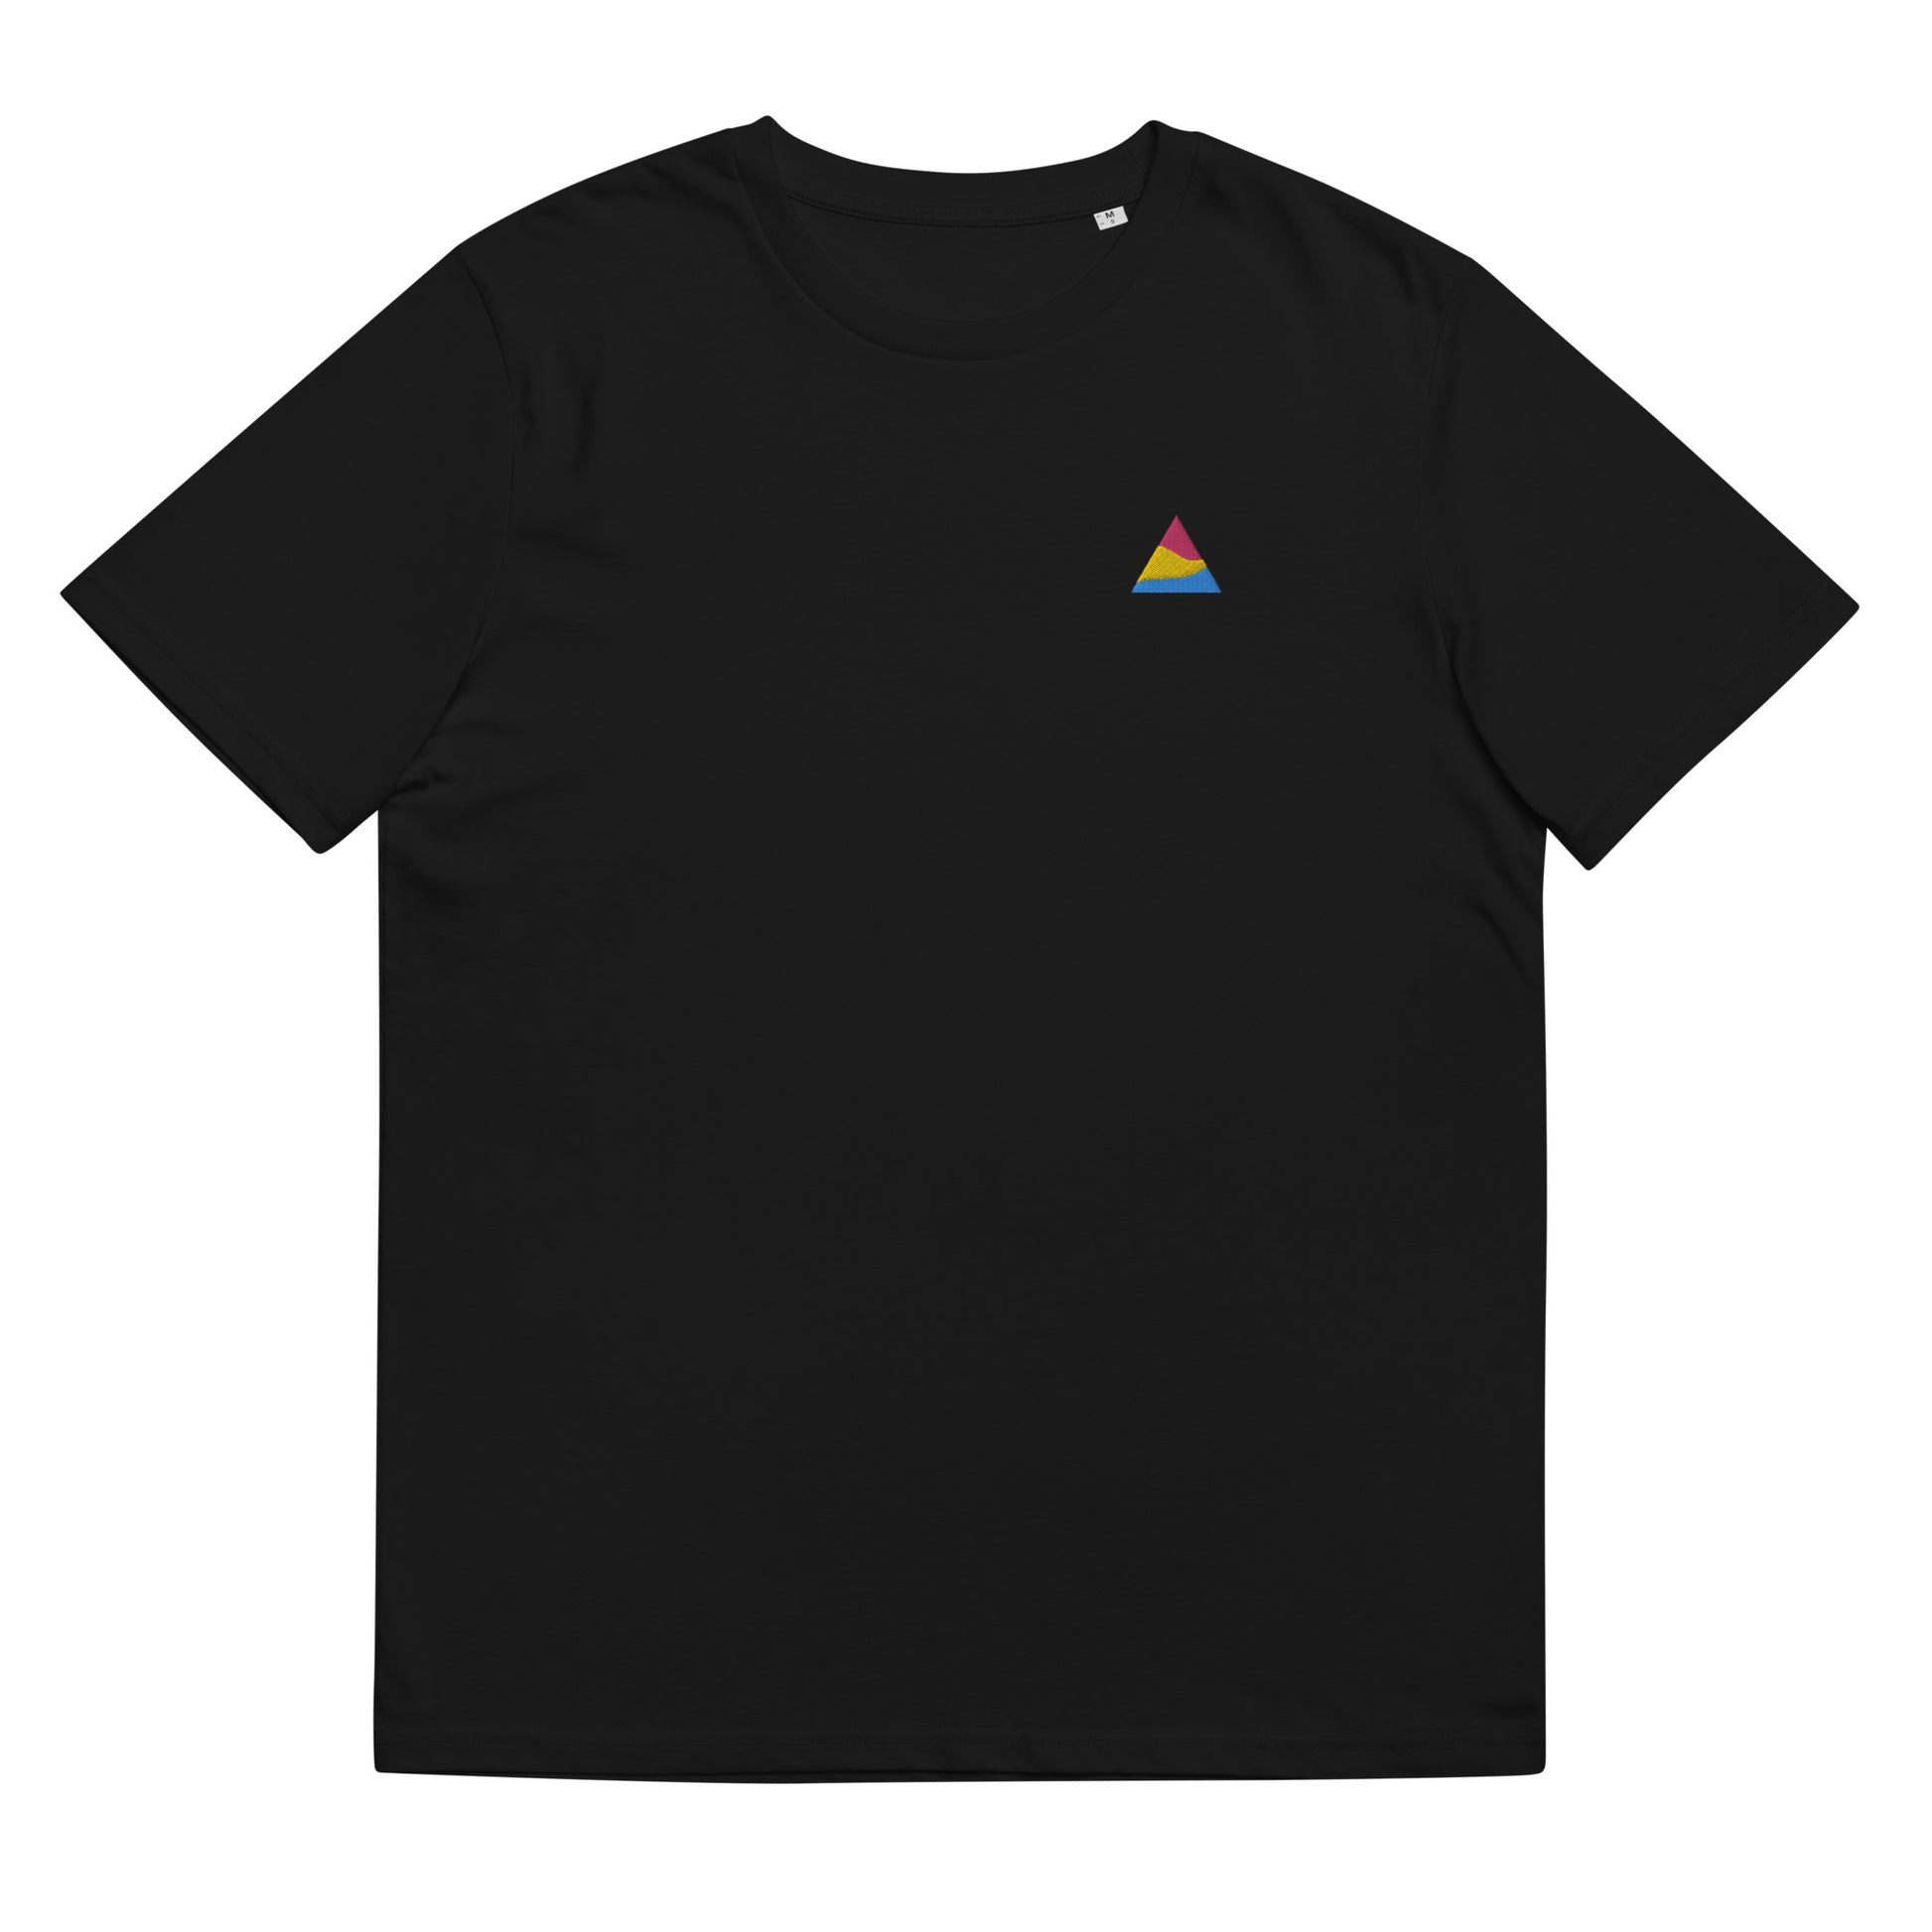 Fitted black organic cotton t-shirt with a small embroidered triangle in pansexual colors on the left chest. Available in sizes S to 3XL.